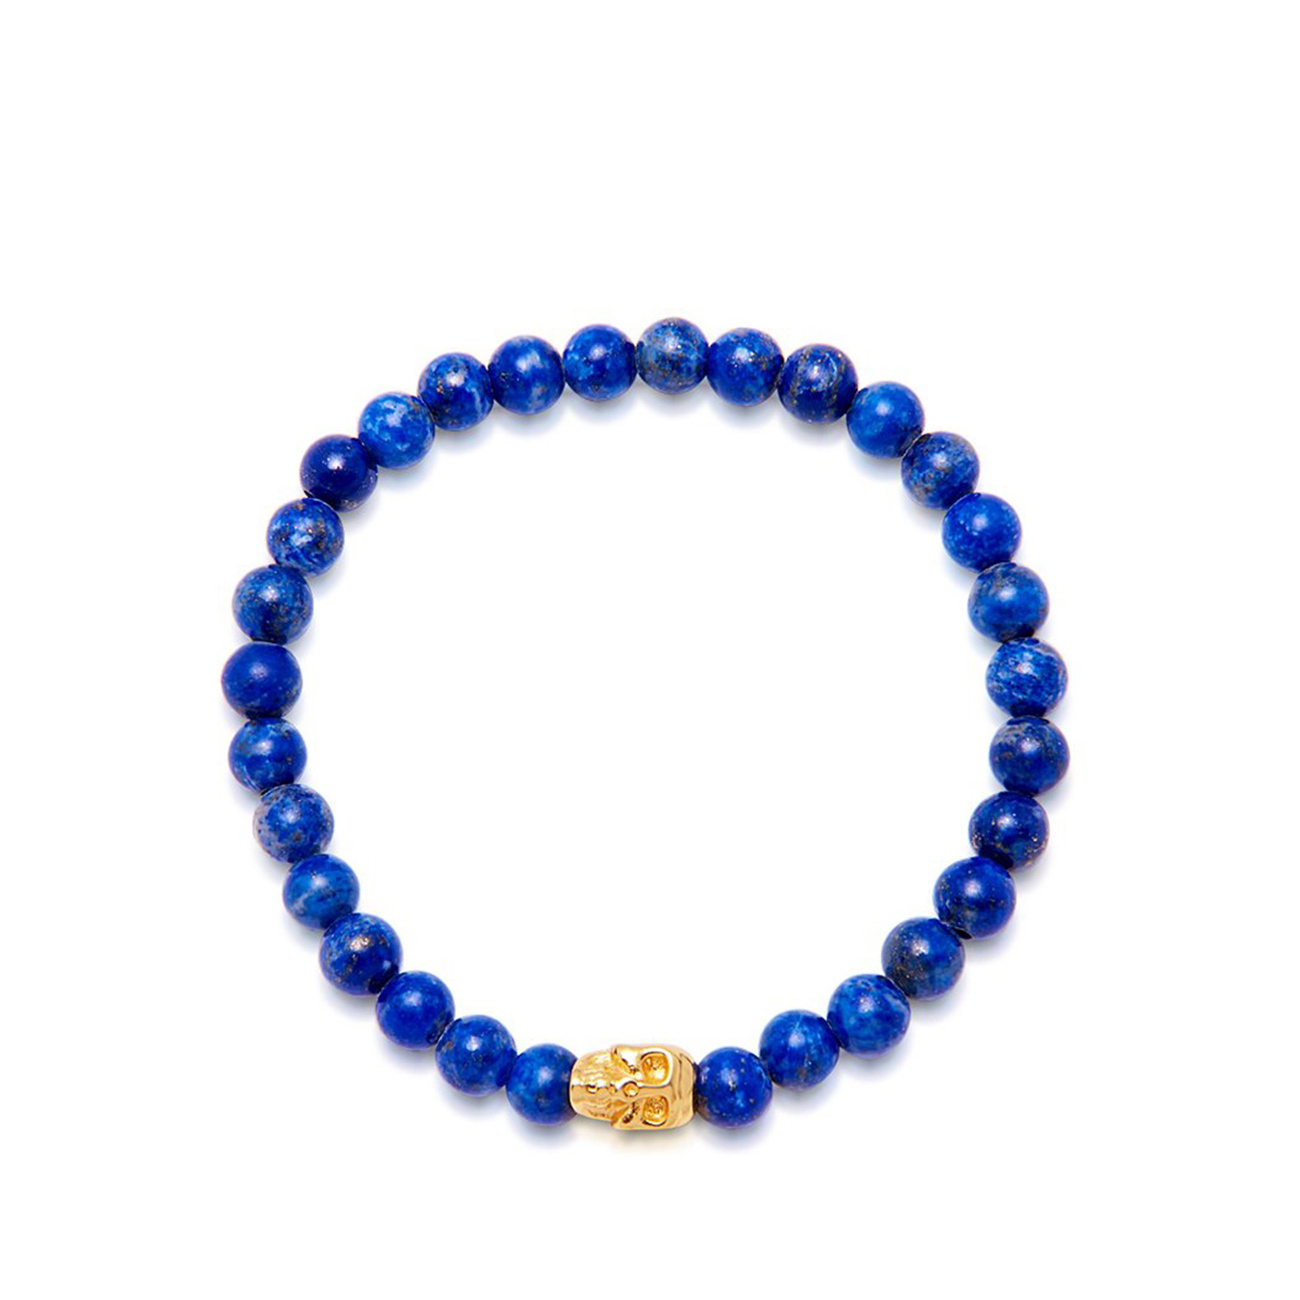 Nialaya Men's Wristband with Blue Lapis and Skull